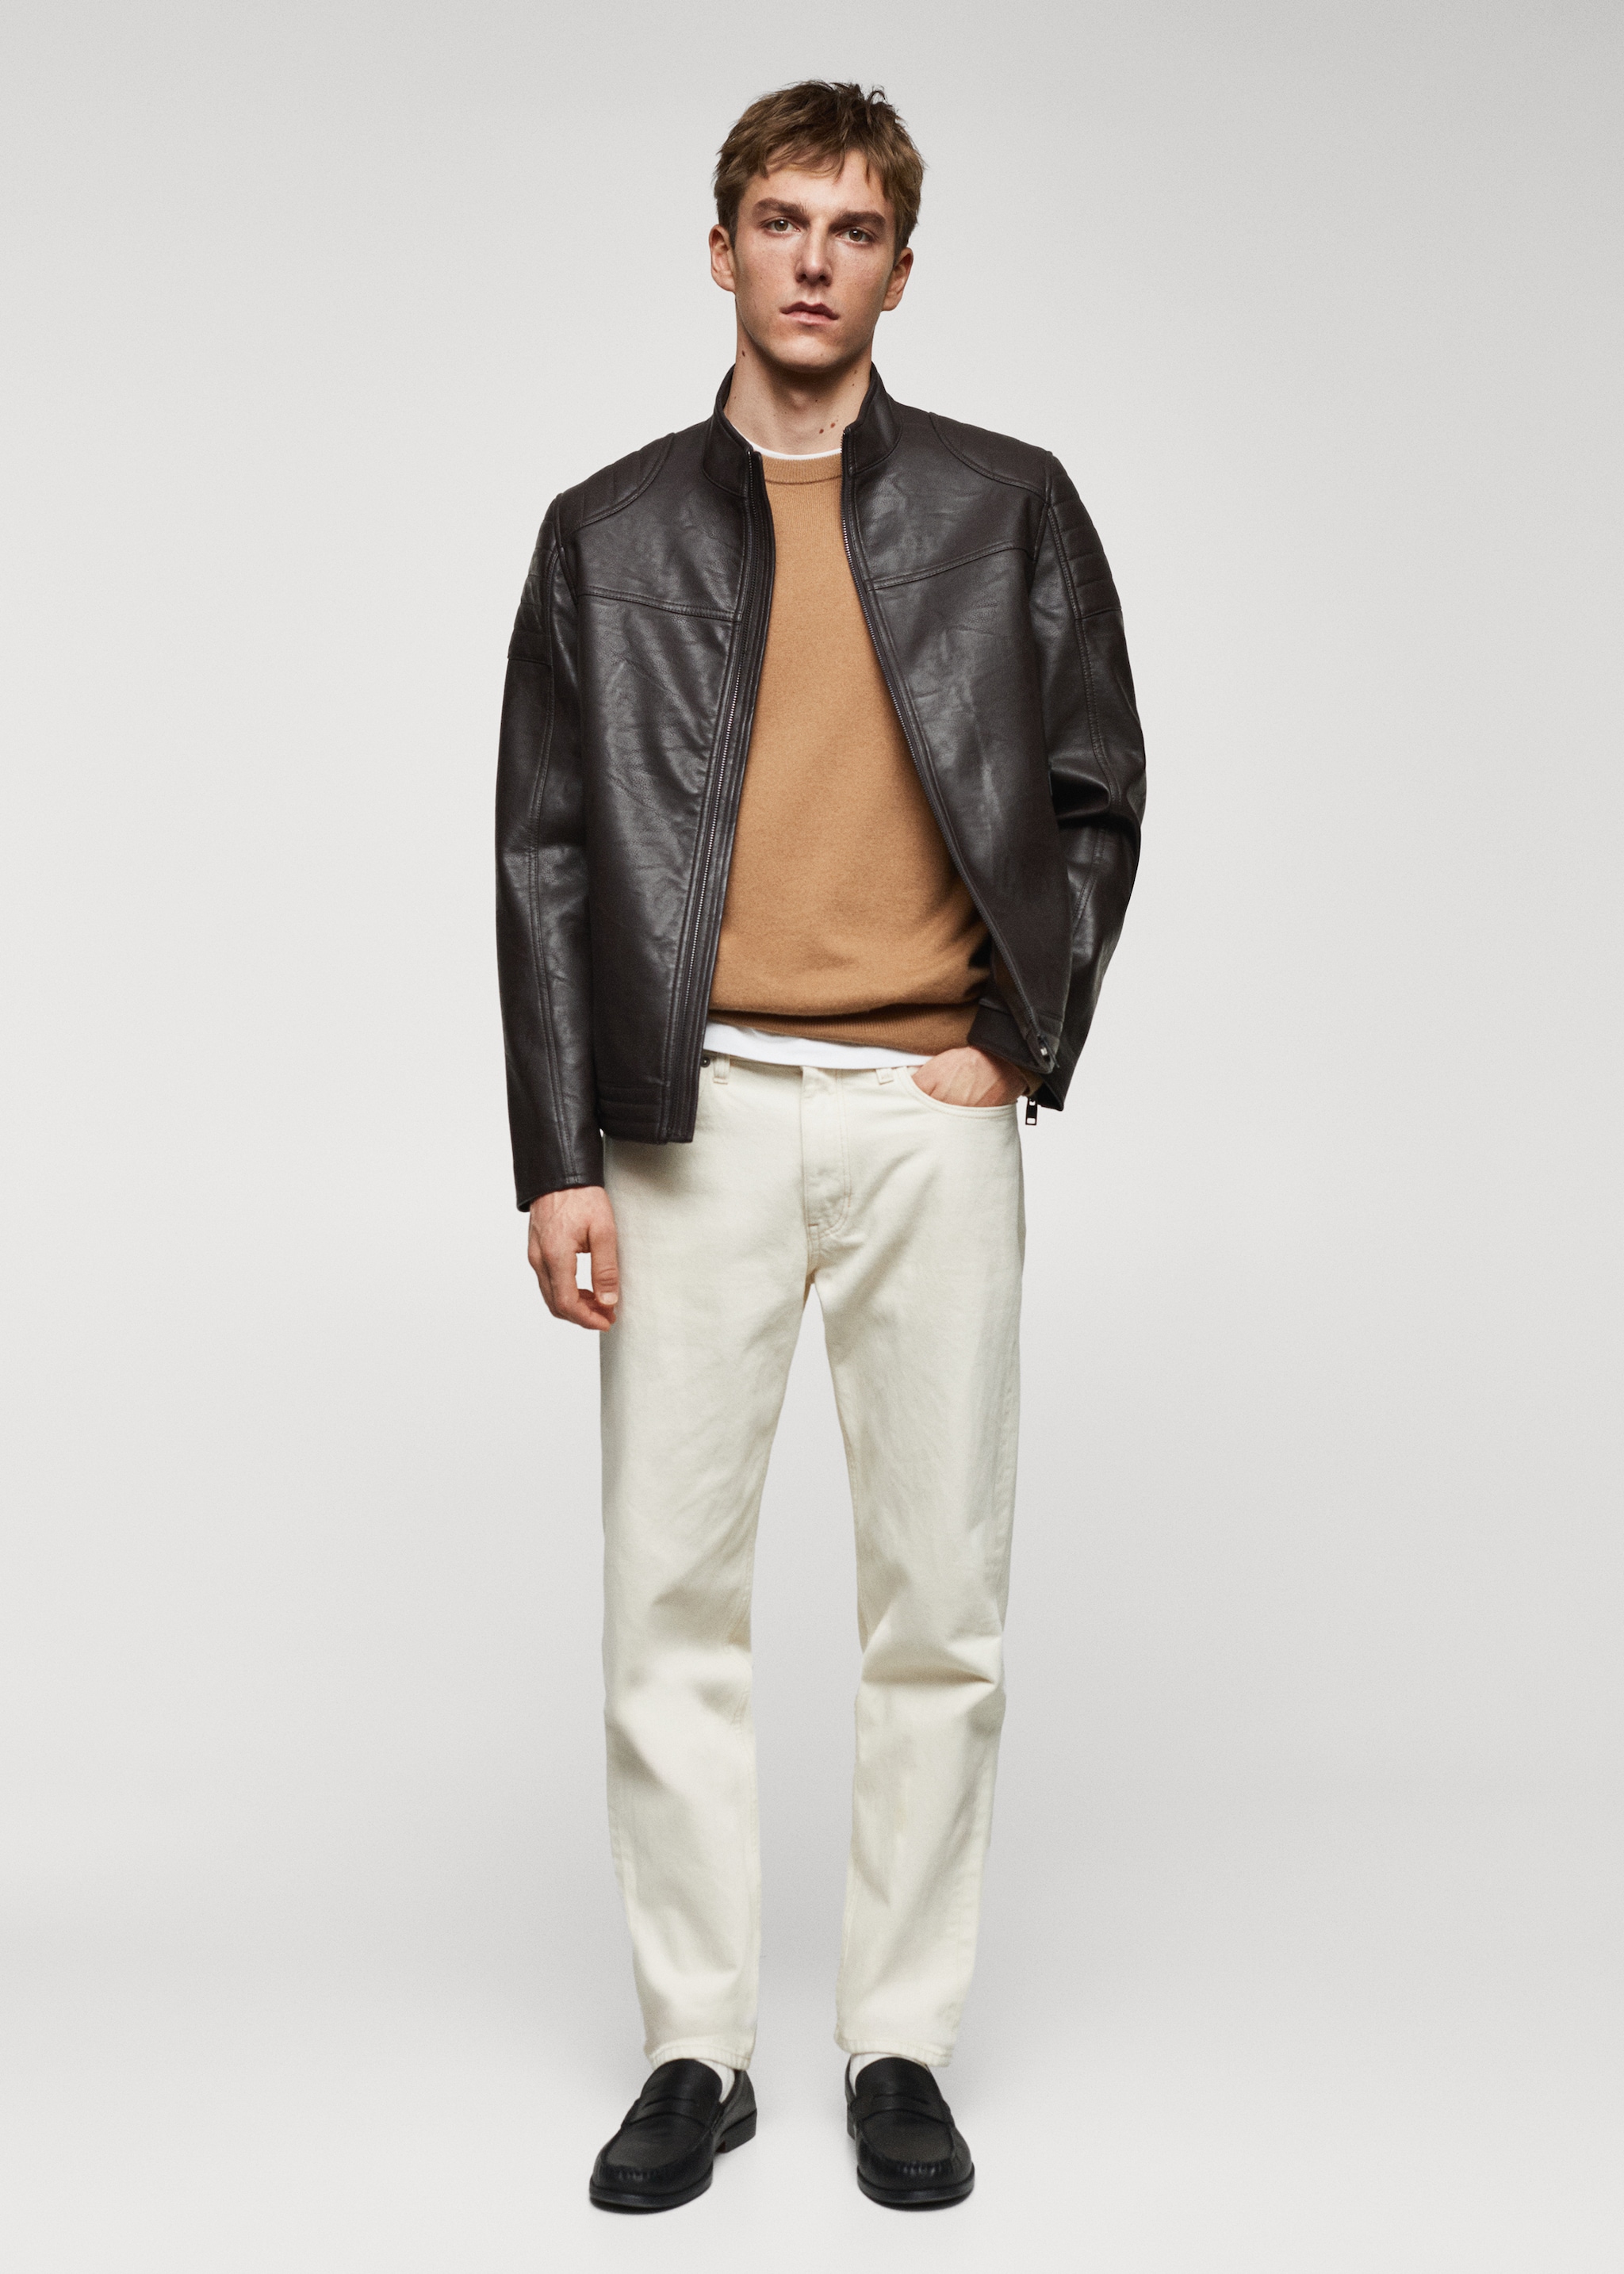 Nappa leather-effect jacket - General plane